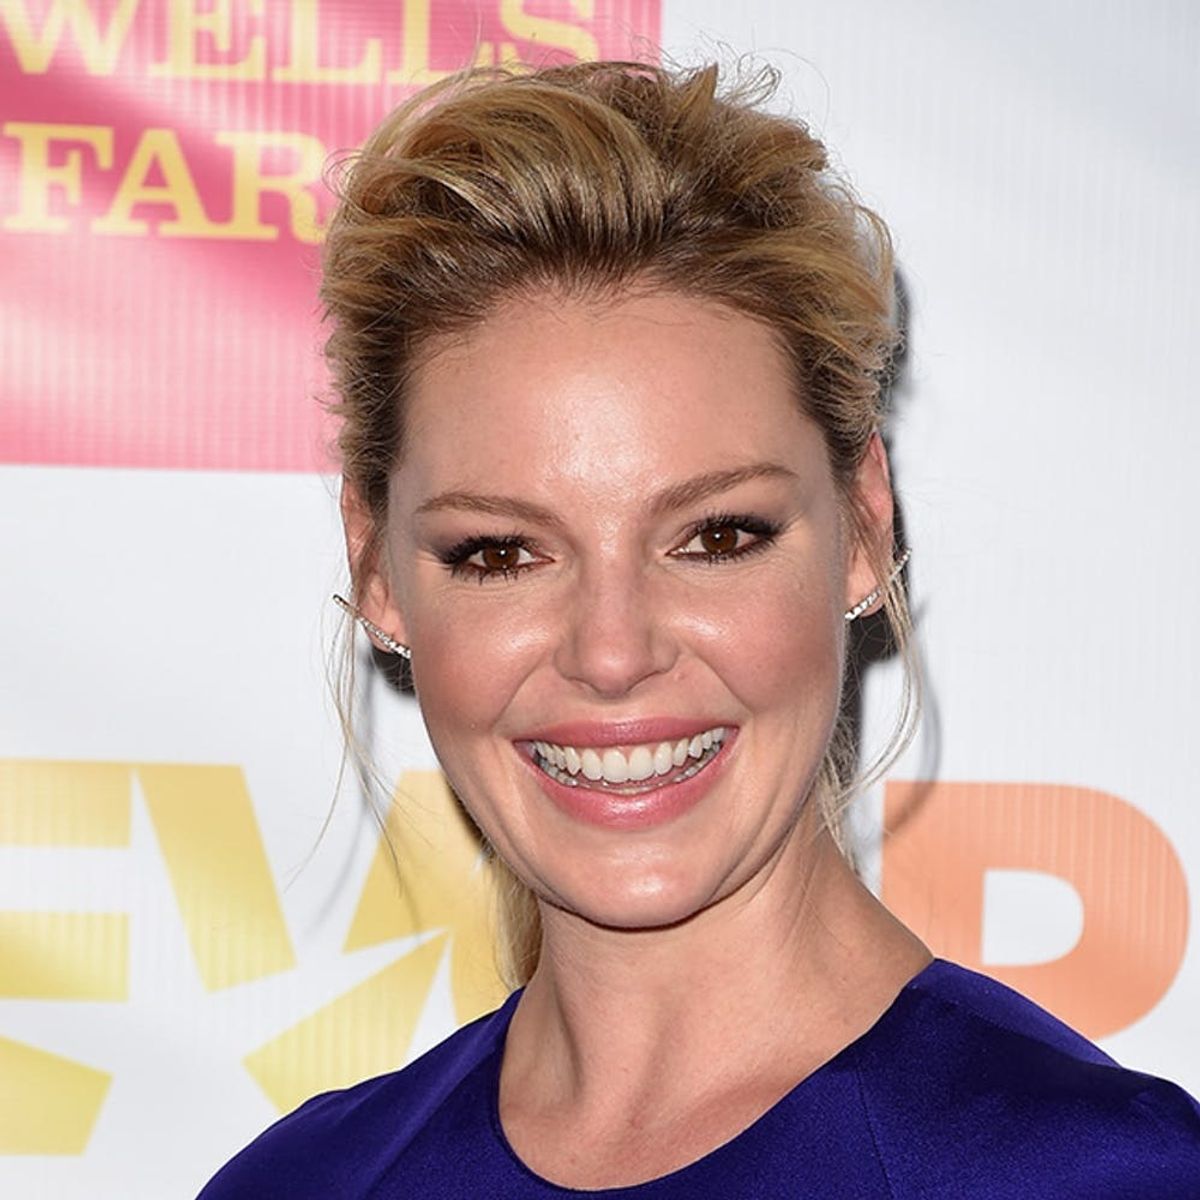 This Is How Katherine Heigl Gets Out the Door in 10 Minutes Flat